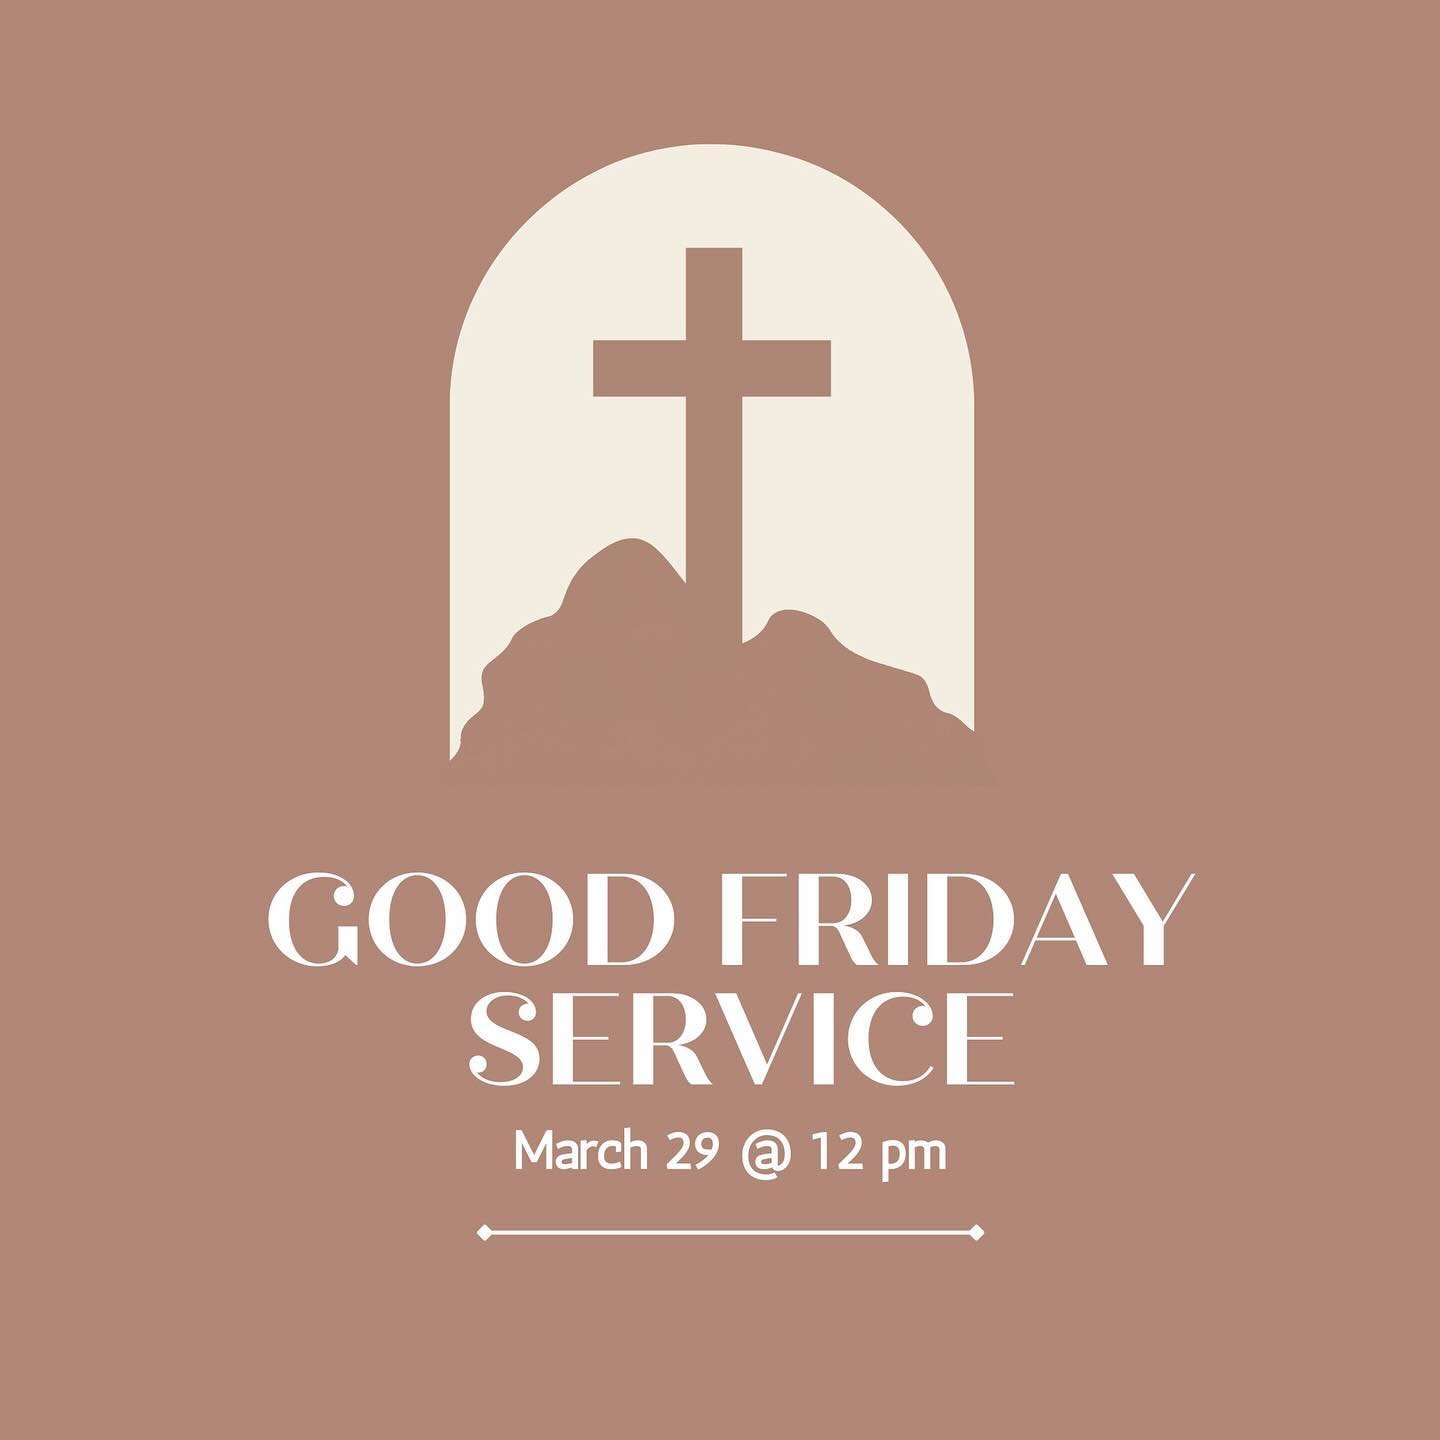 We will be having our contemplative Good Friday service this week at noon. The space will be open beforehand for anyone who wishes to view the Stations of the Cross and meditate on Christ&rsquo;s suffering for our sake. This is a special (and brief) 